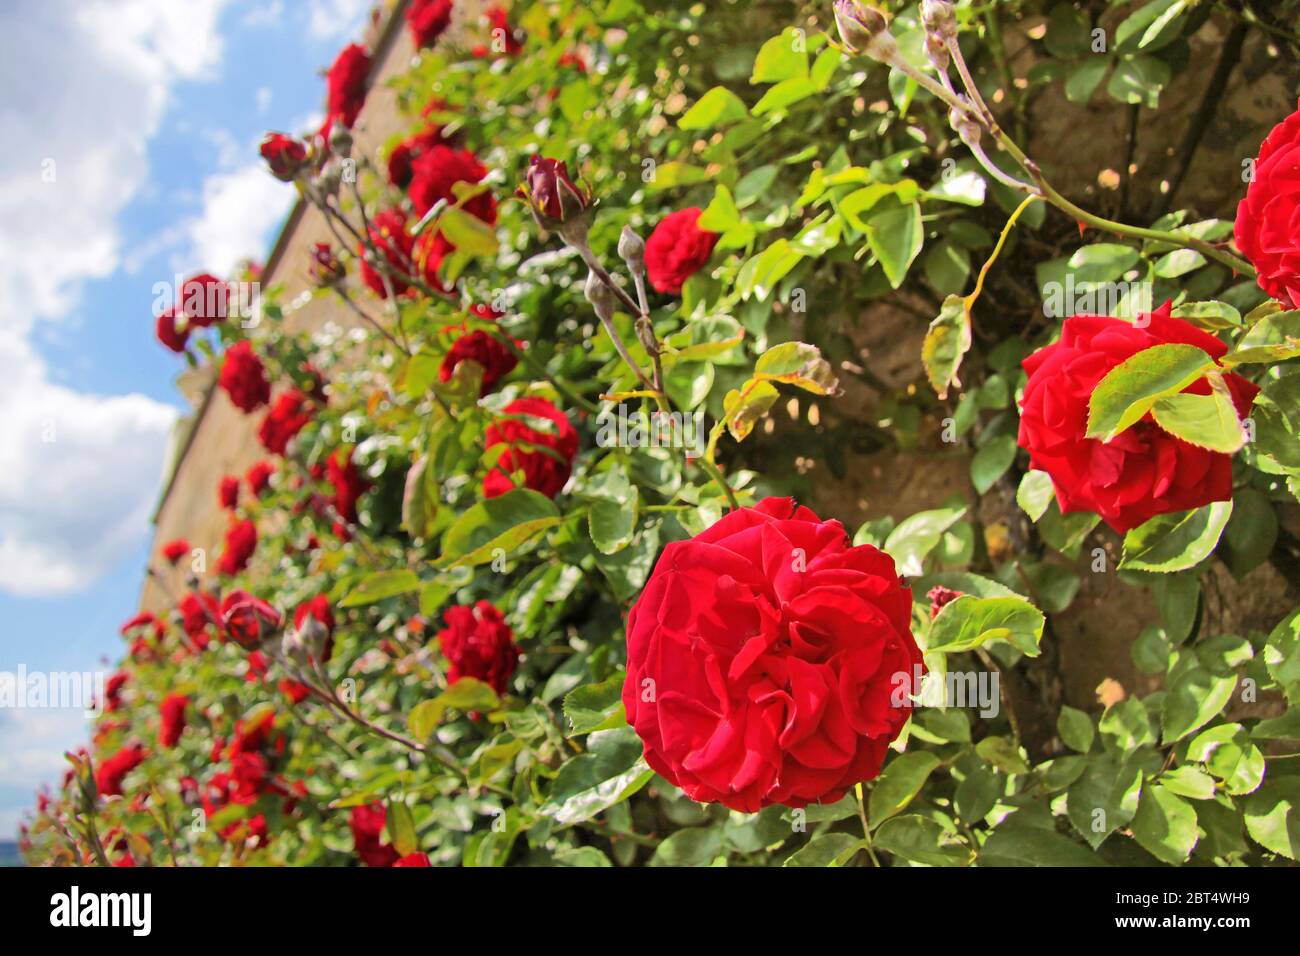 flower, rose, plant, roses, wall, rose tree, red, old, garden, flower, plant, Stock Photo